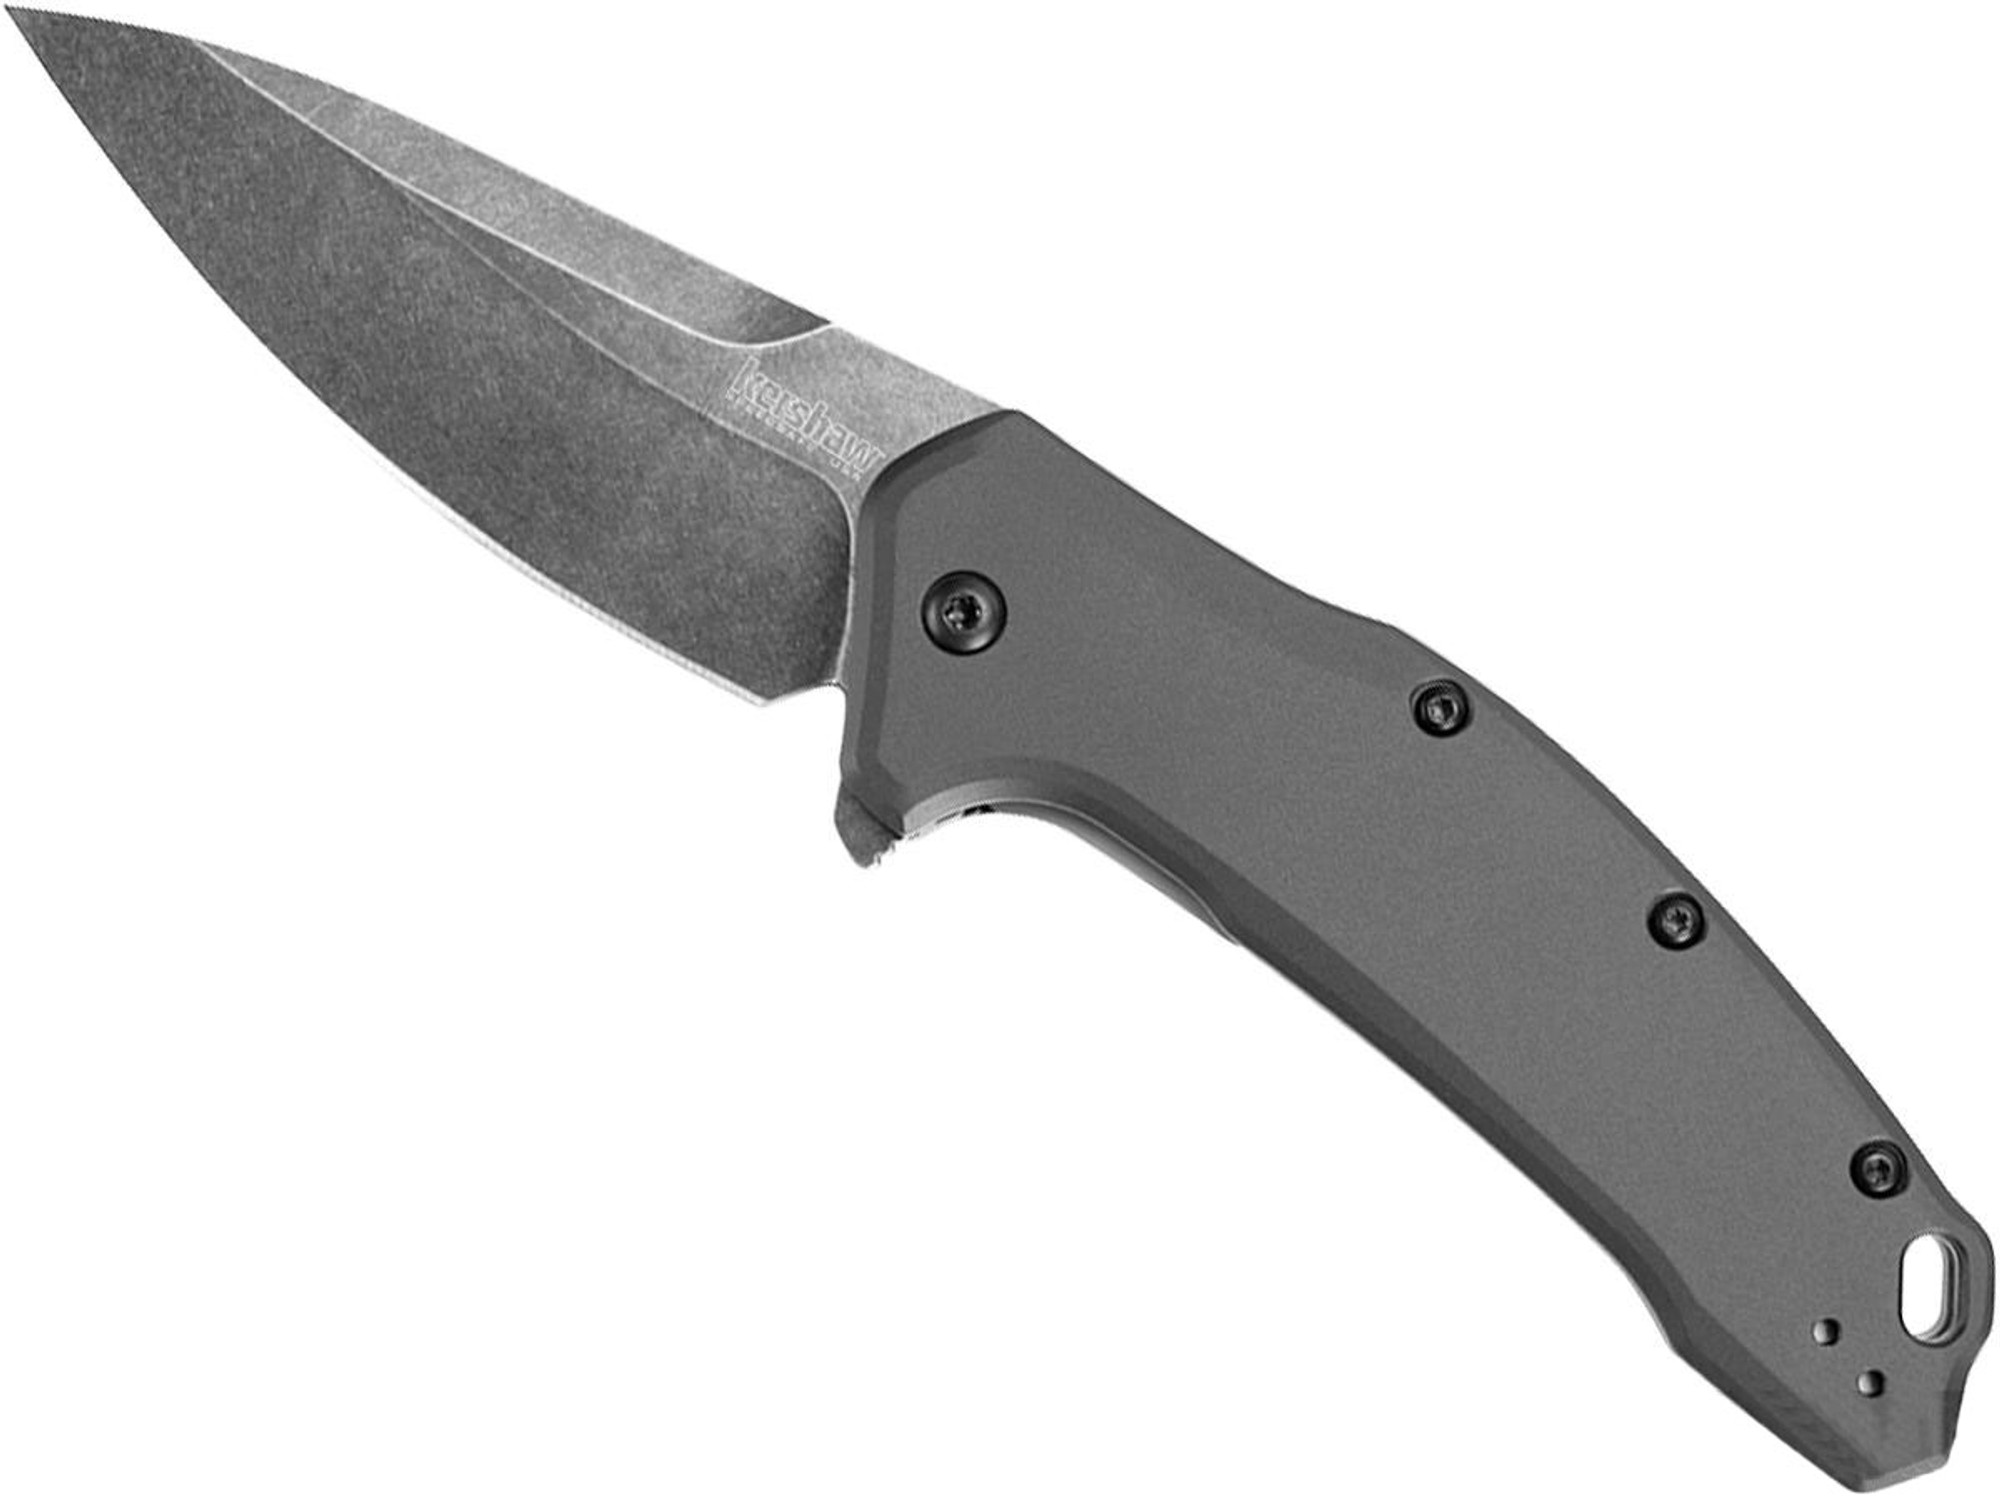 Kershaw Link Folding Knife with 3.25" Blade and Speed Assist Opening - BlackWash Finish